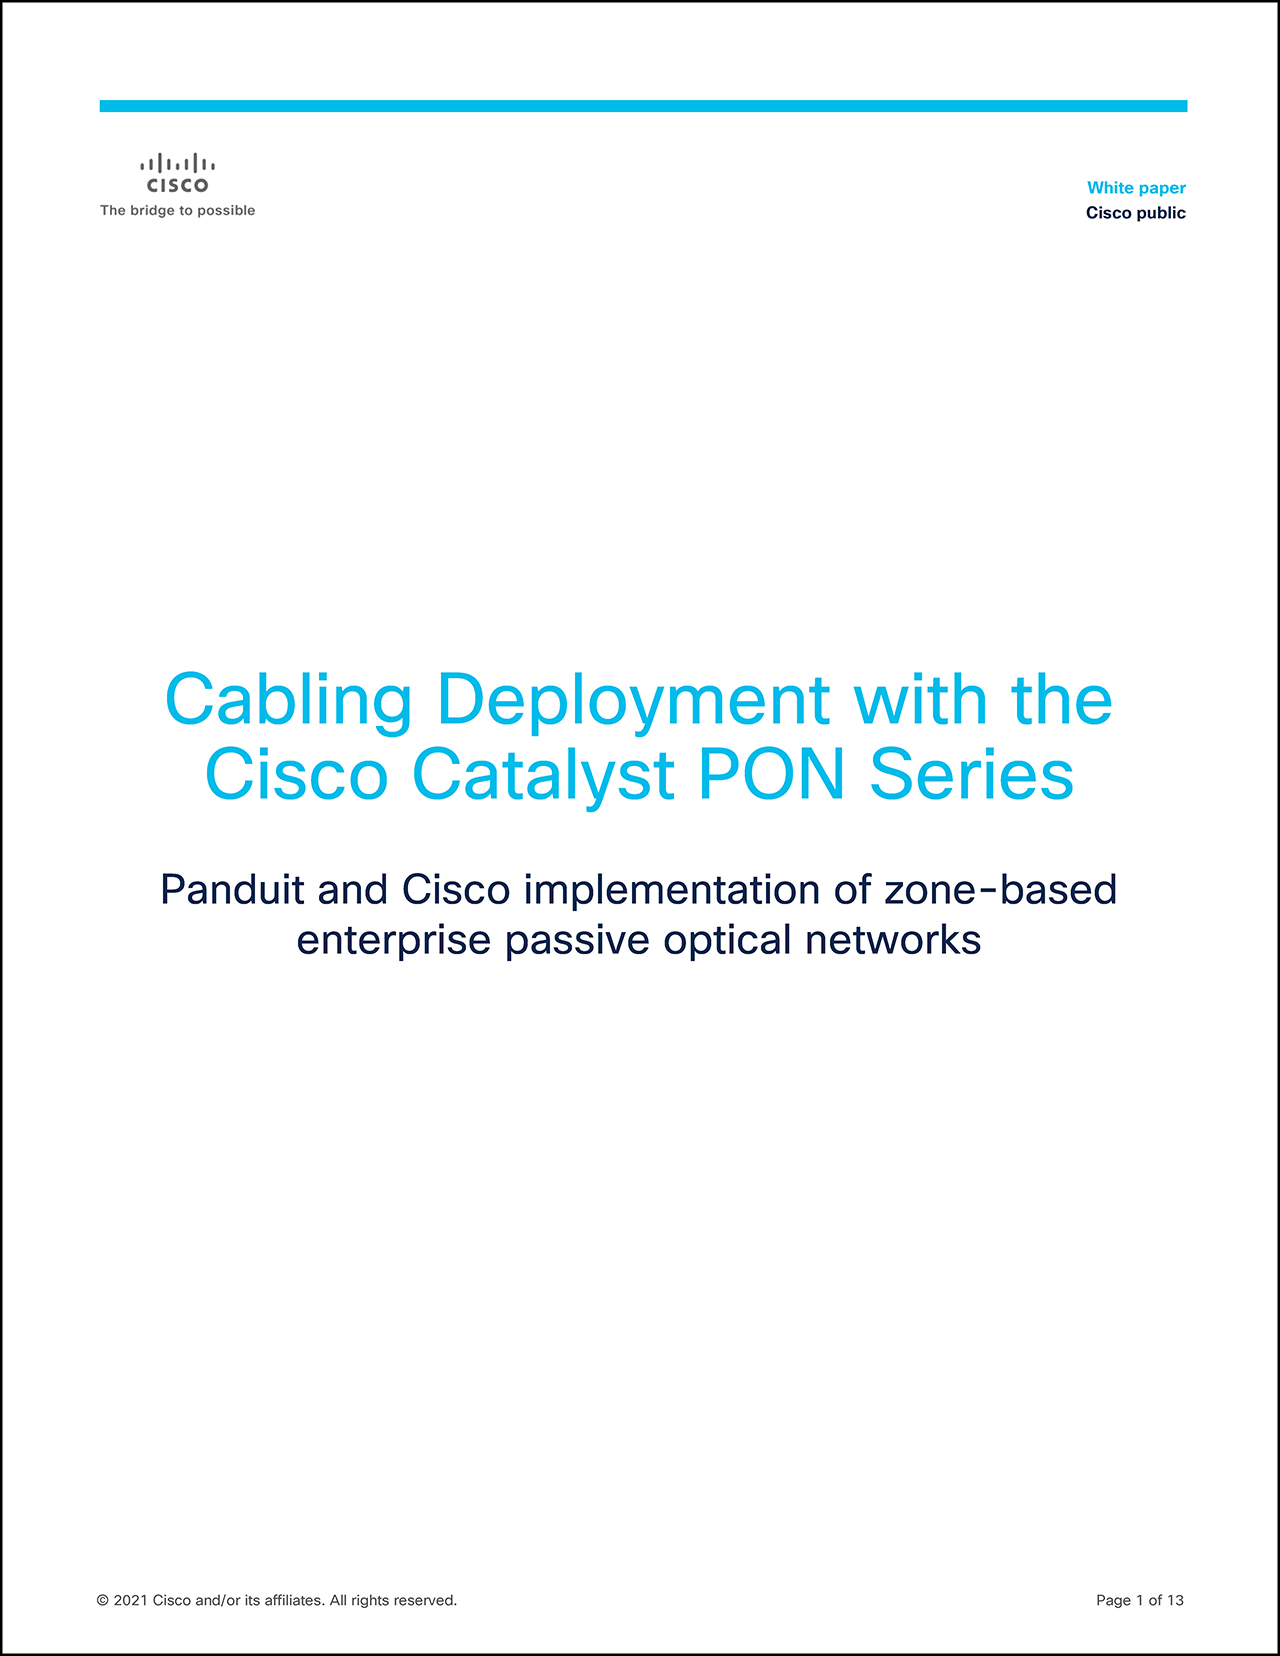 Download Cabling Deployment with the Cisco Catalyst PON Series